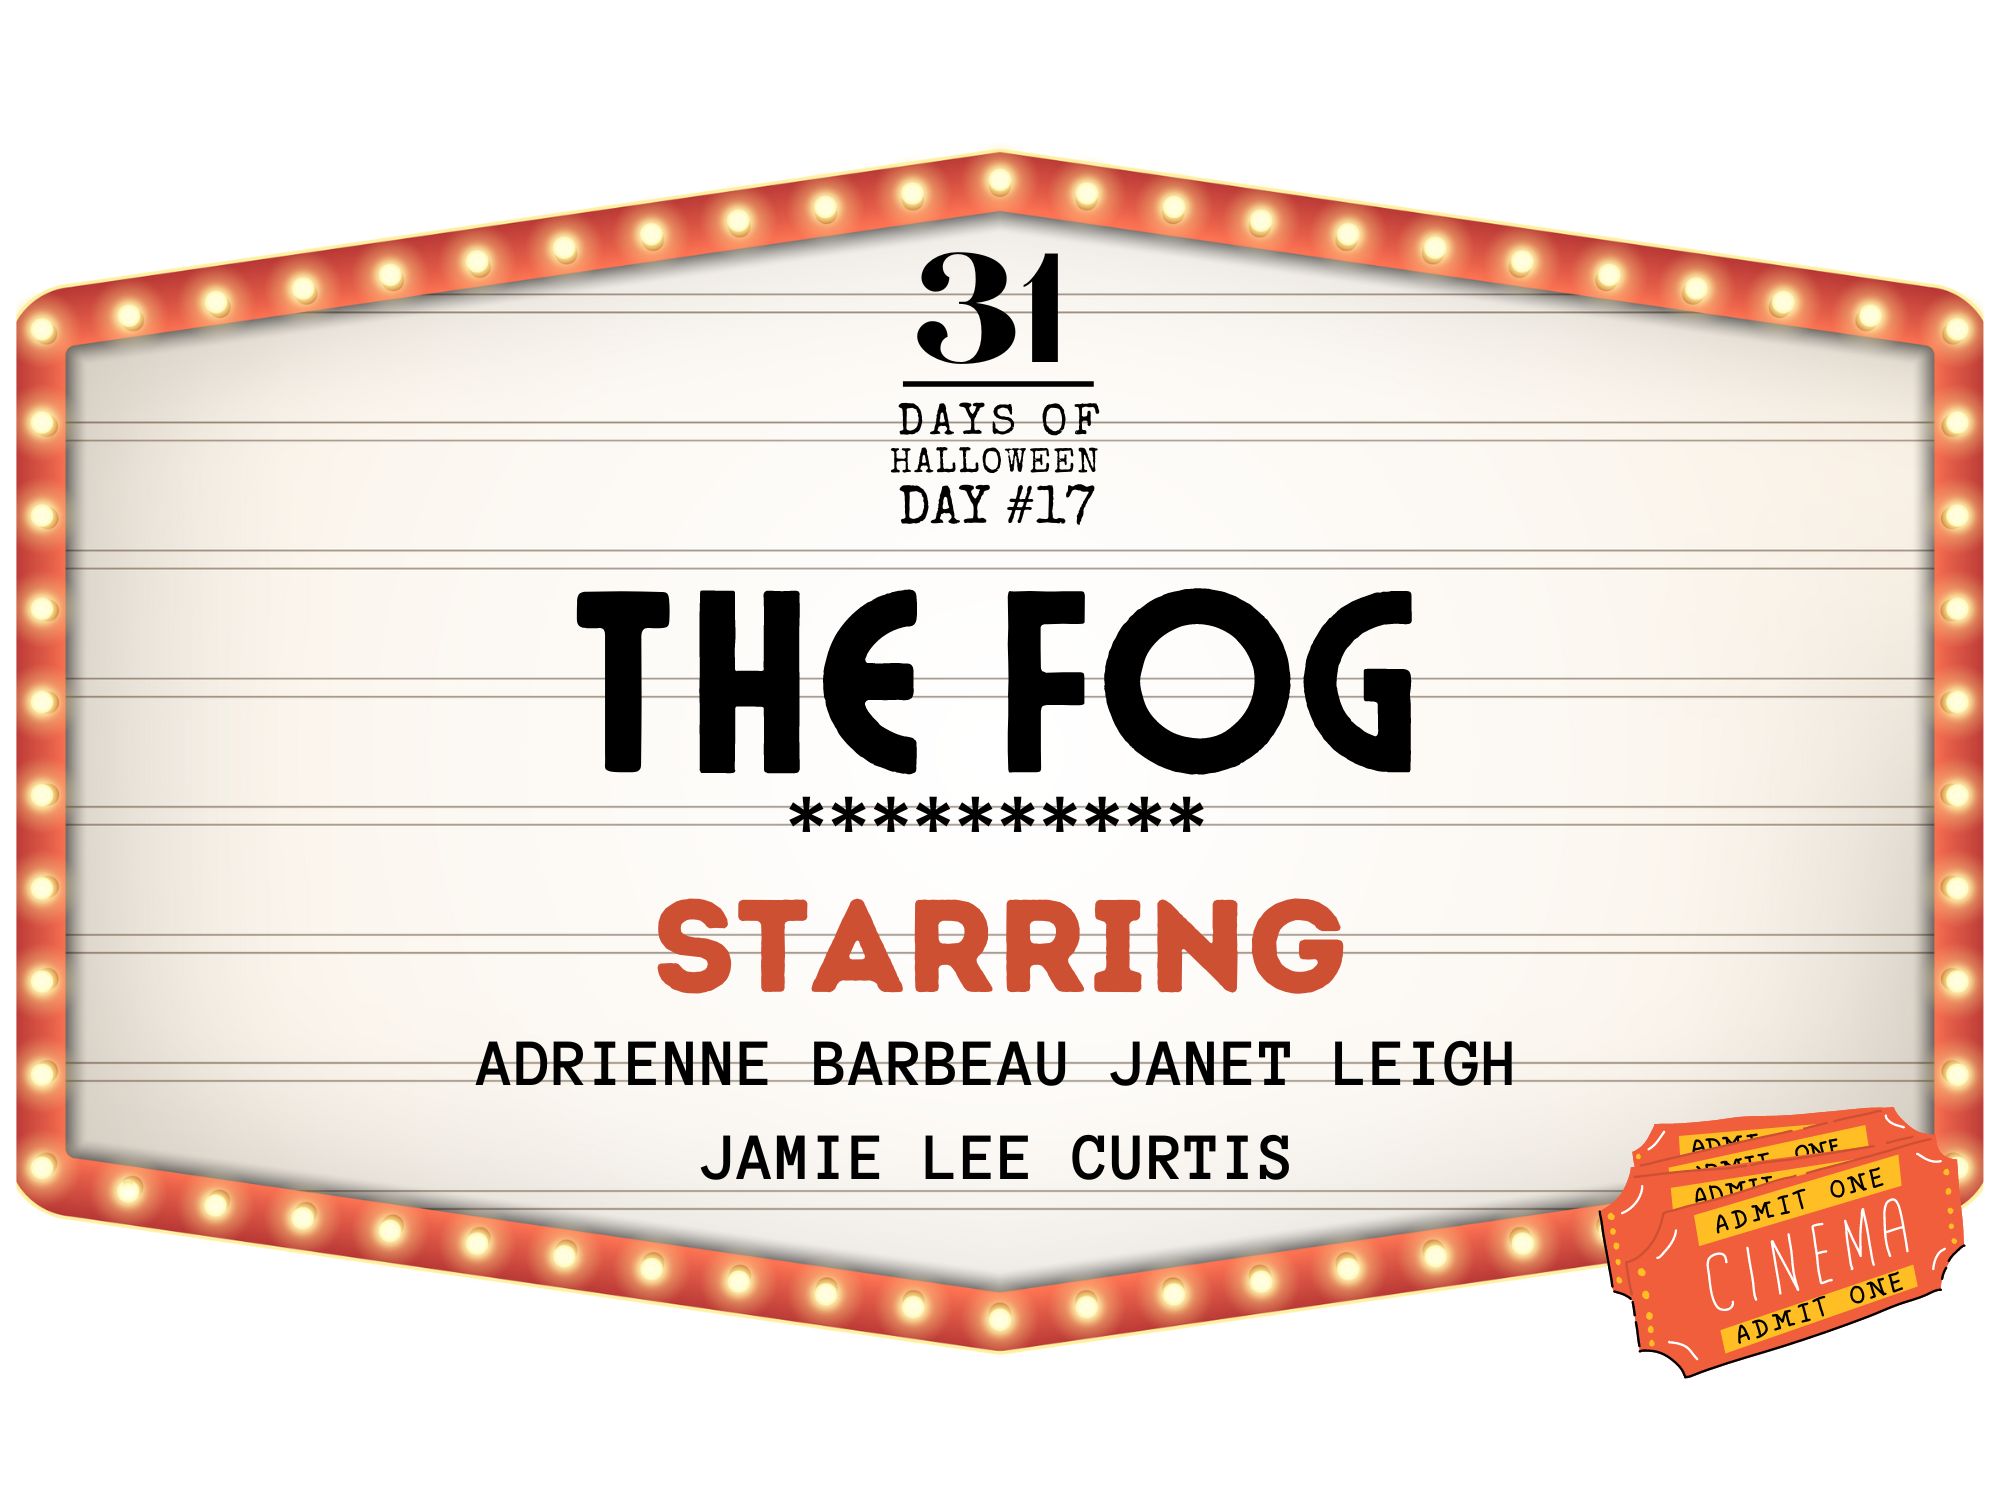 31 Days of Halloween: Day #17, The Fog